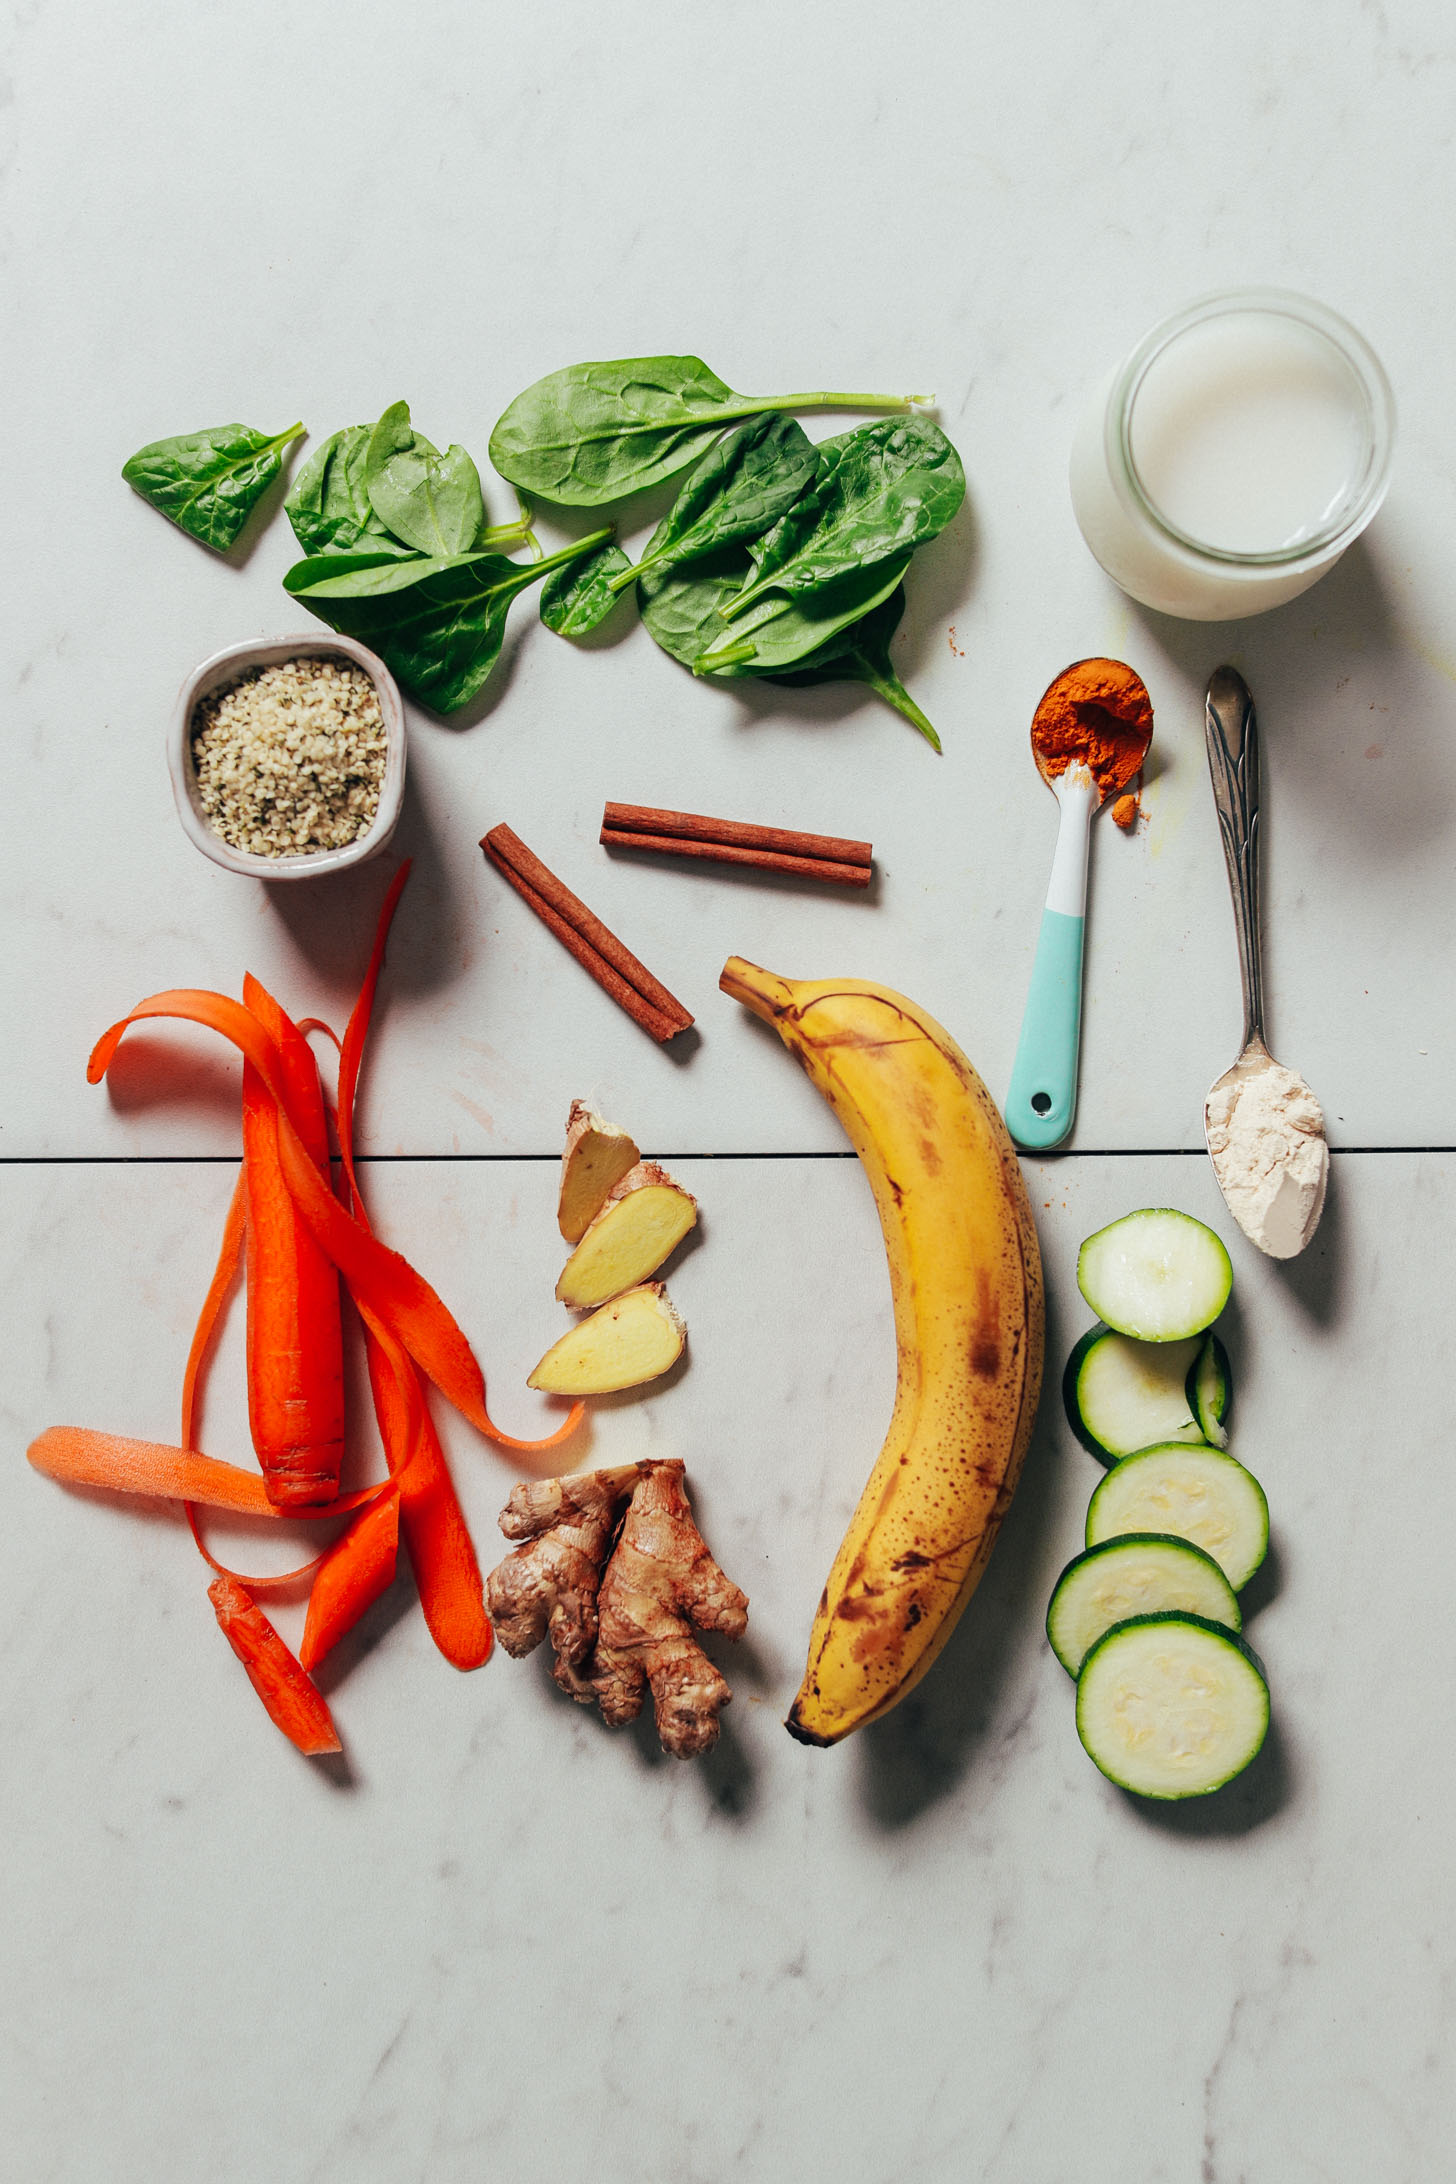 Overhead image of warming winter smoothie ingredients, including banana, spinach, zucchini, carrot, and protein powder